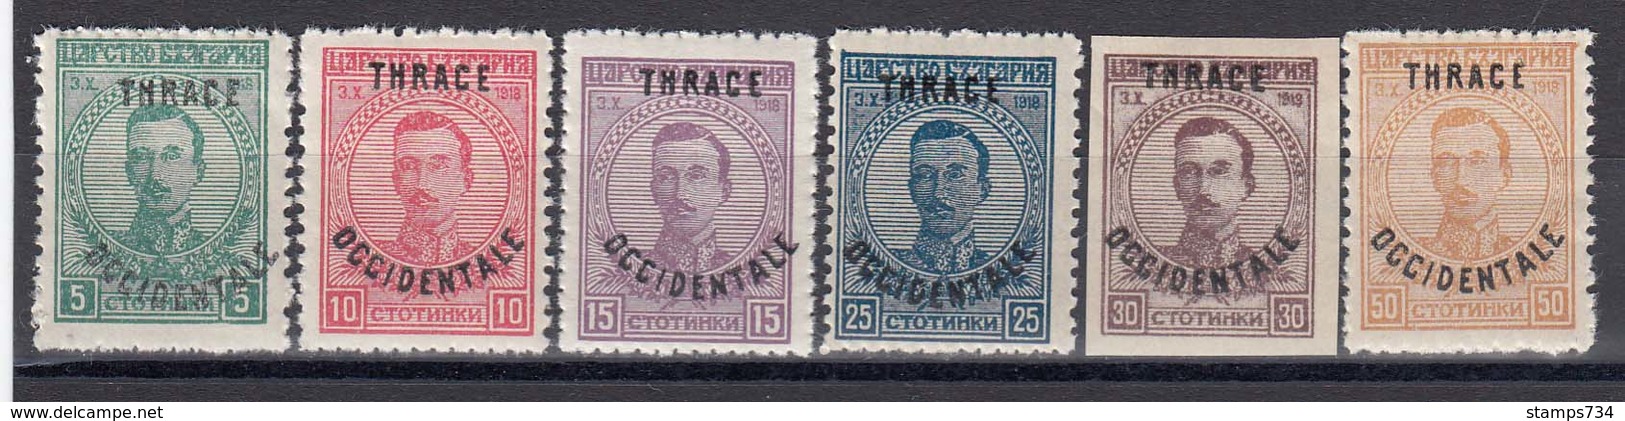 Thrace 1920 - Bulgarian Stamps With Overprint "THRACE OCCIDENTALE", Mi-Nr. 20/25, MNH** - Thrakien